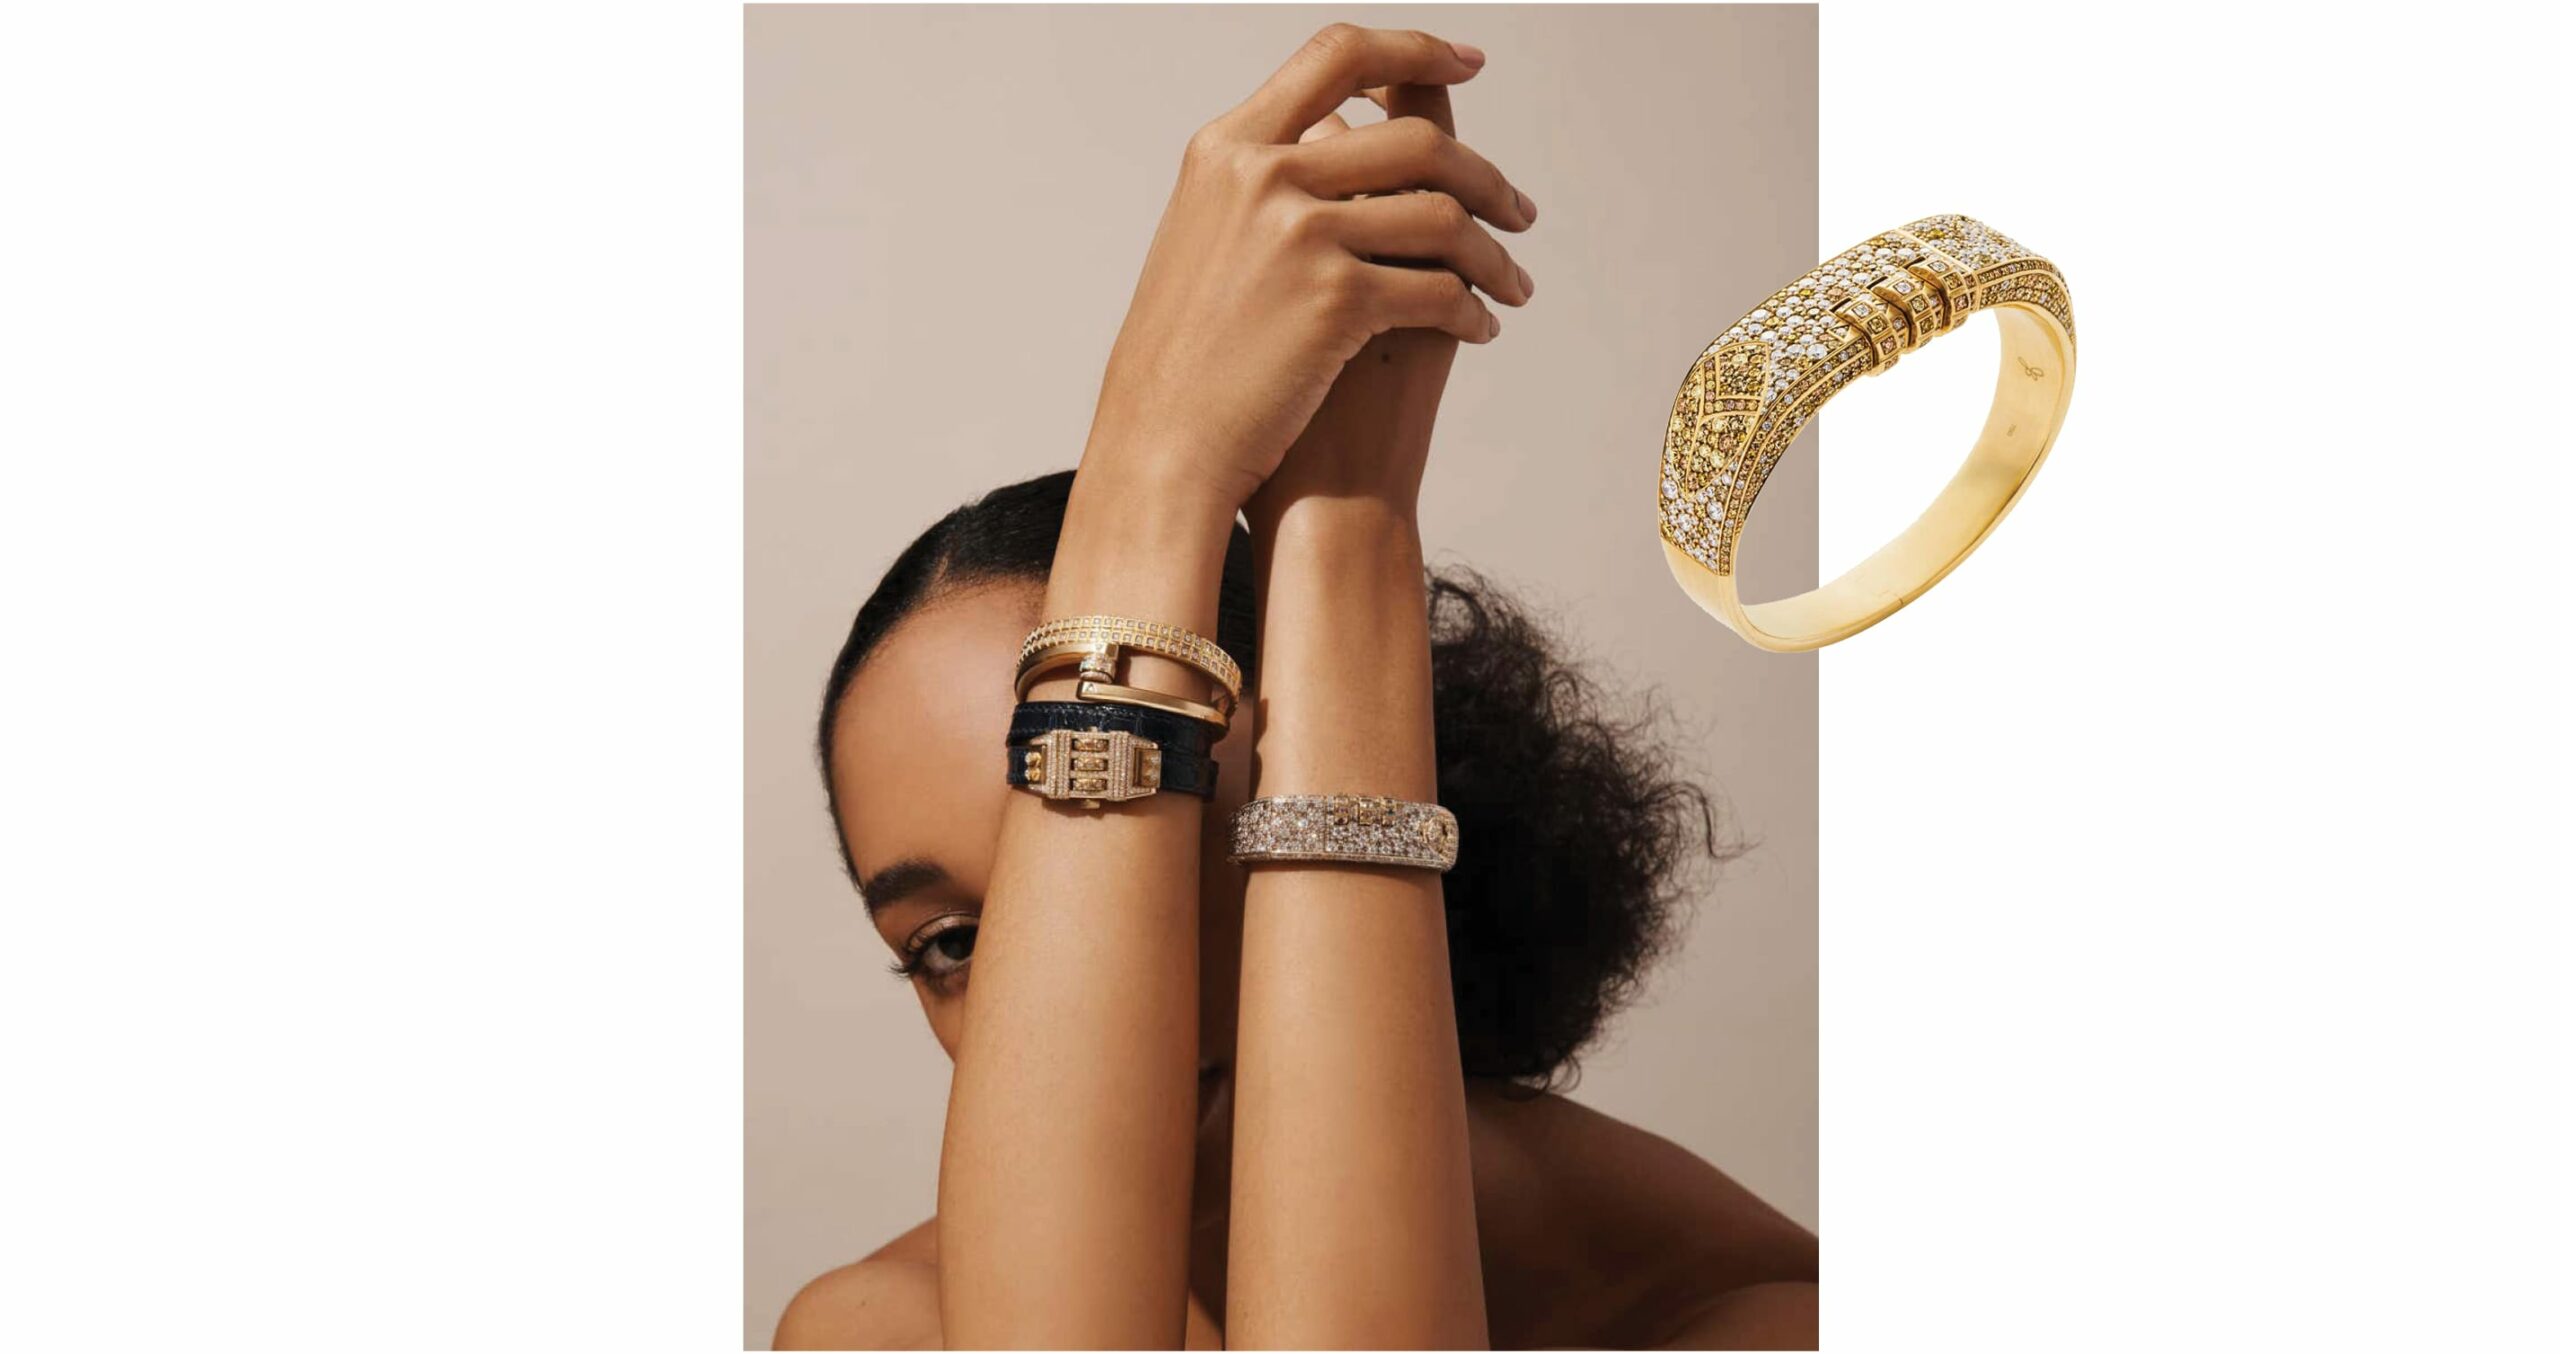 Made to Order Customizable Pave Diamond Code Lock Bracelet from James Banks that features a diamond encrusted lock with a leather wrap bracelet style